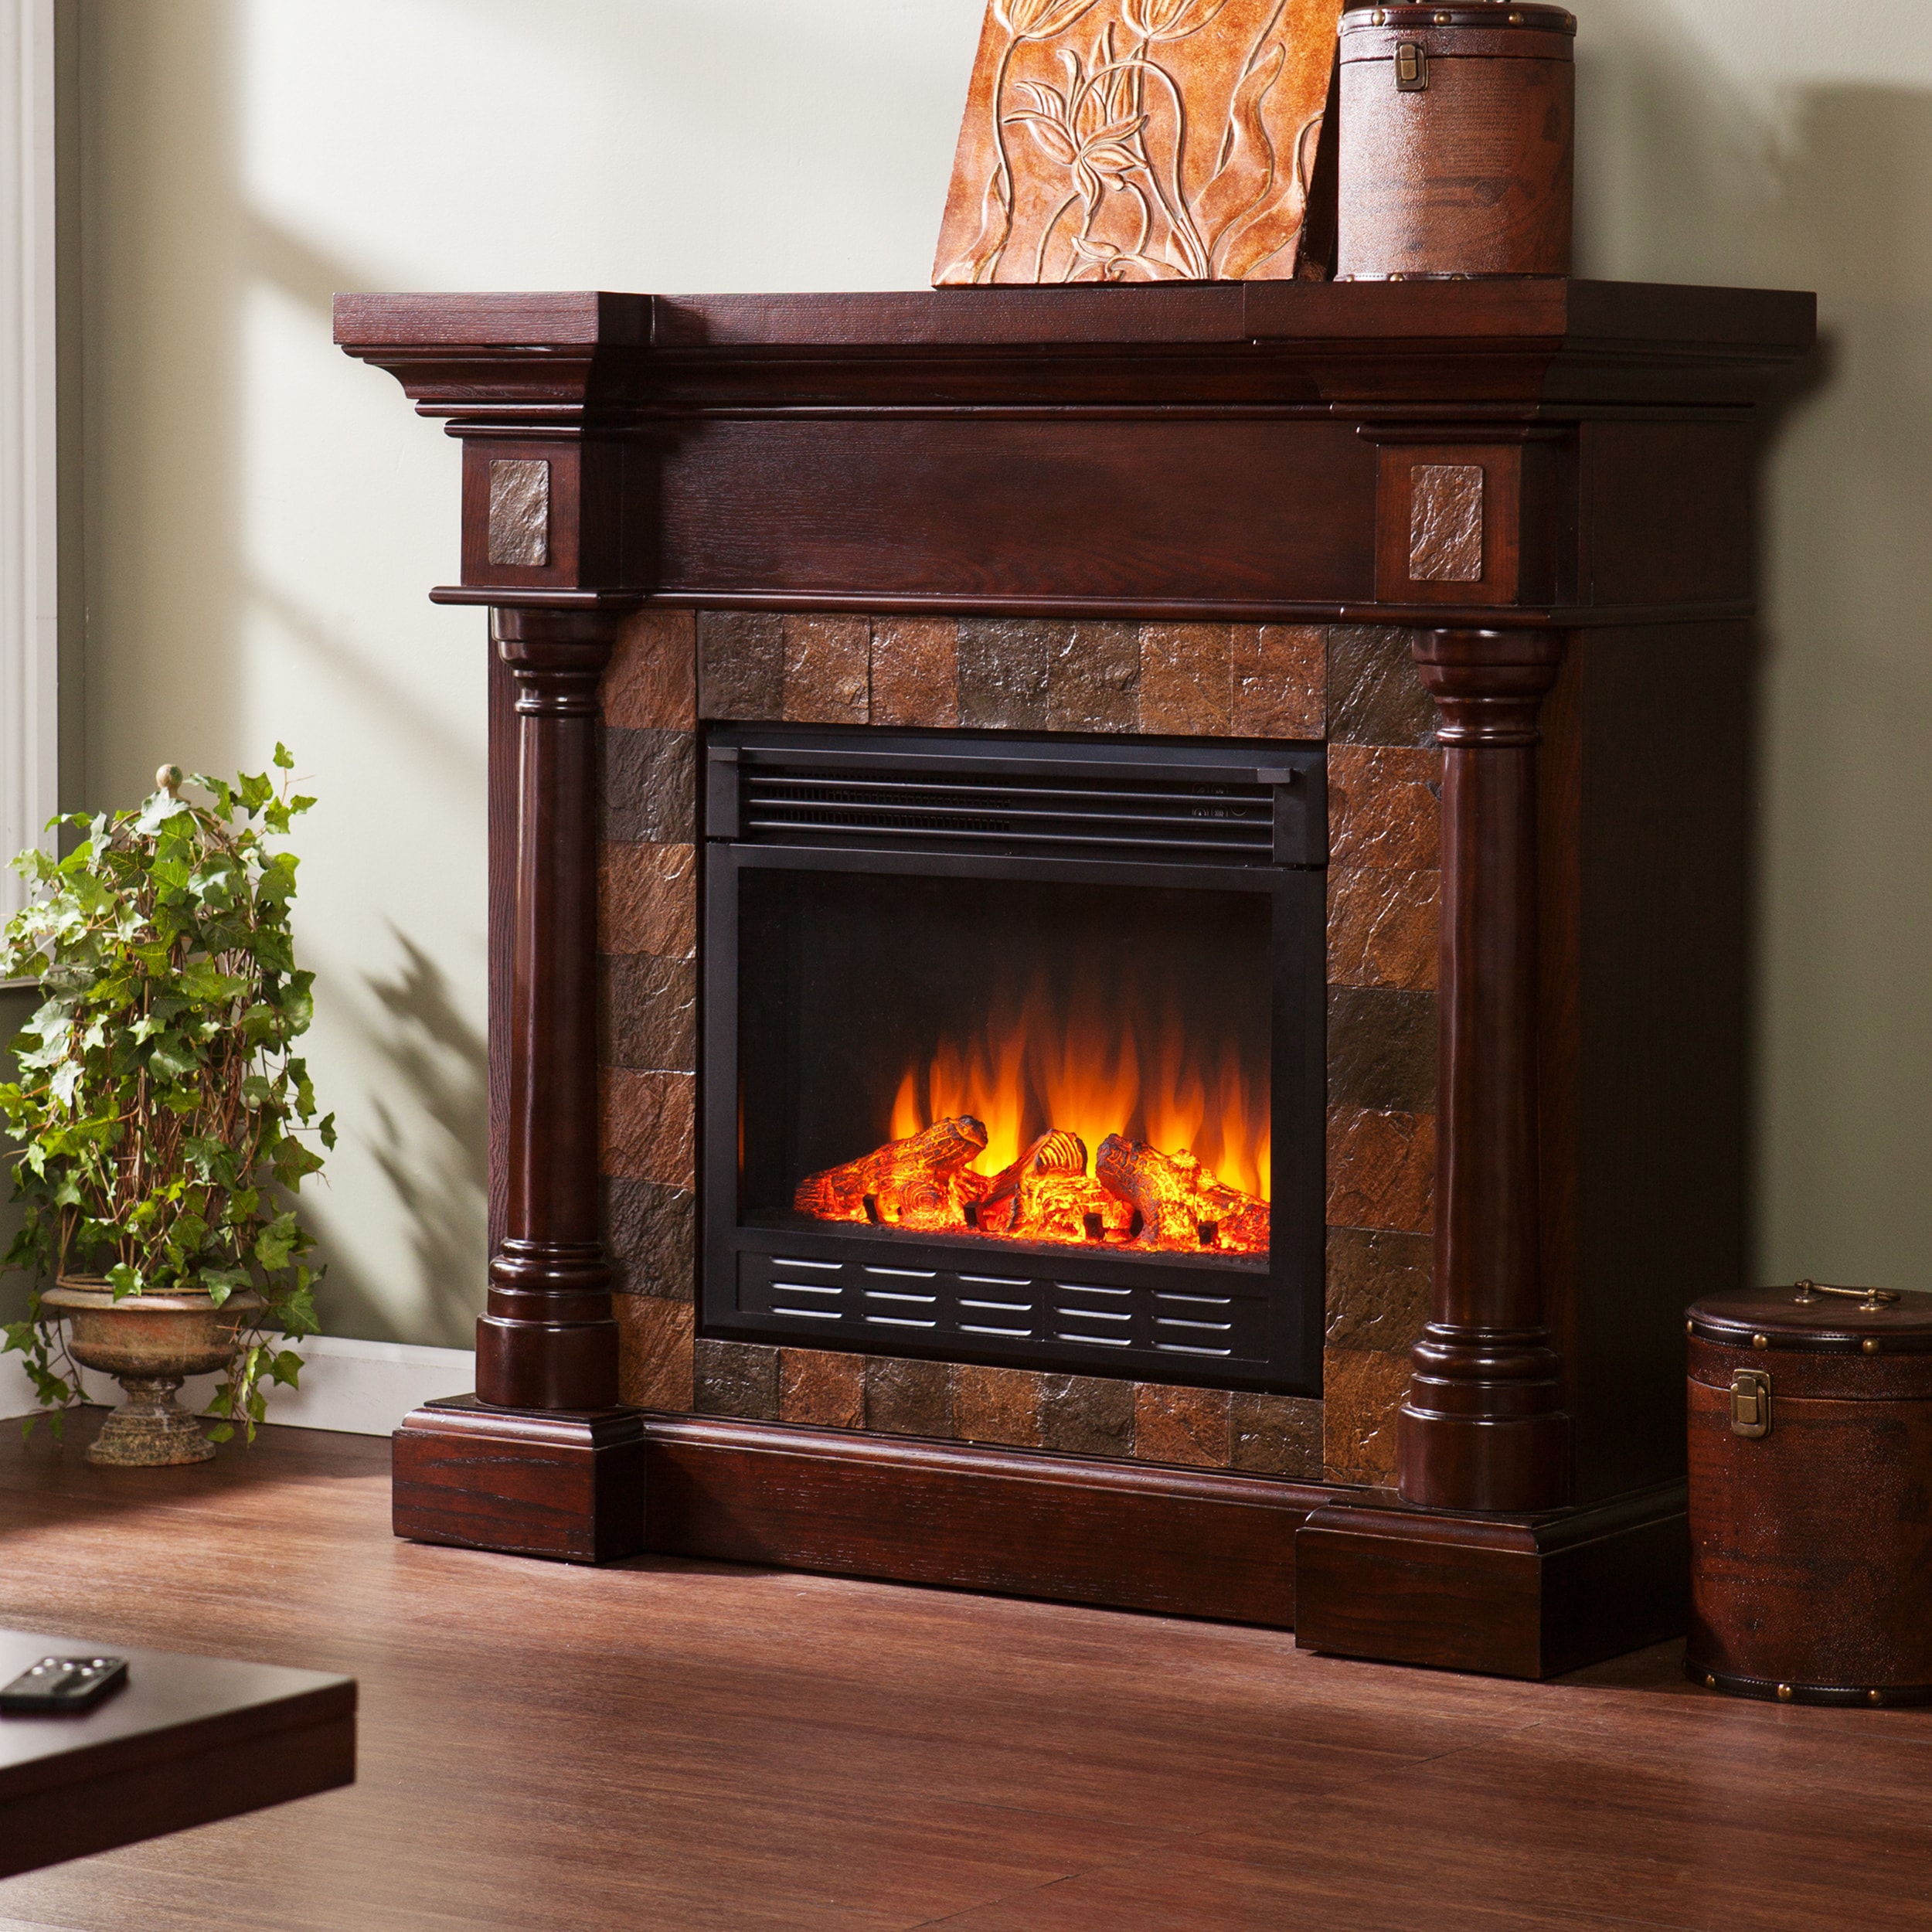 Upton Home Blanchard Espresso Convertible Electric Fireplace